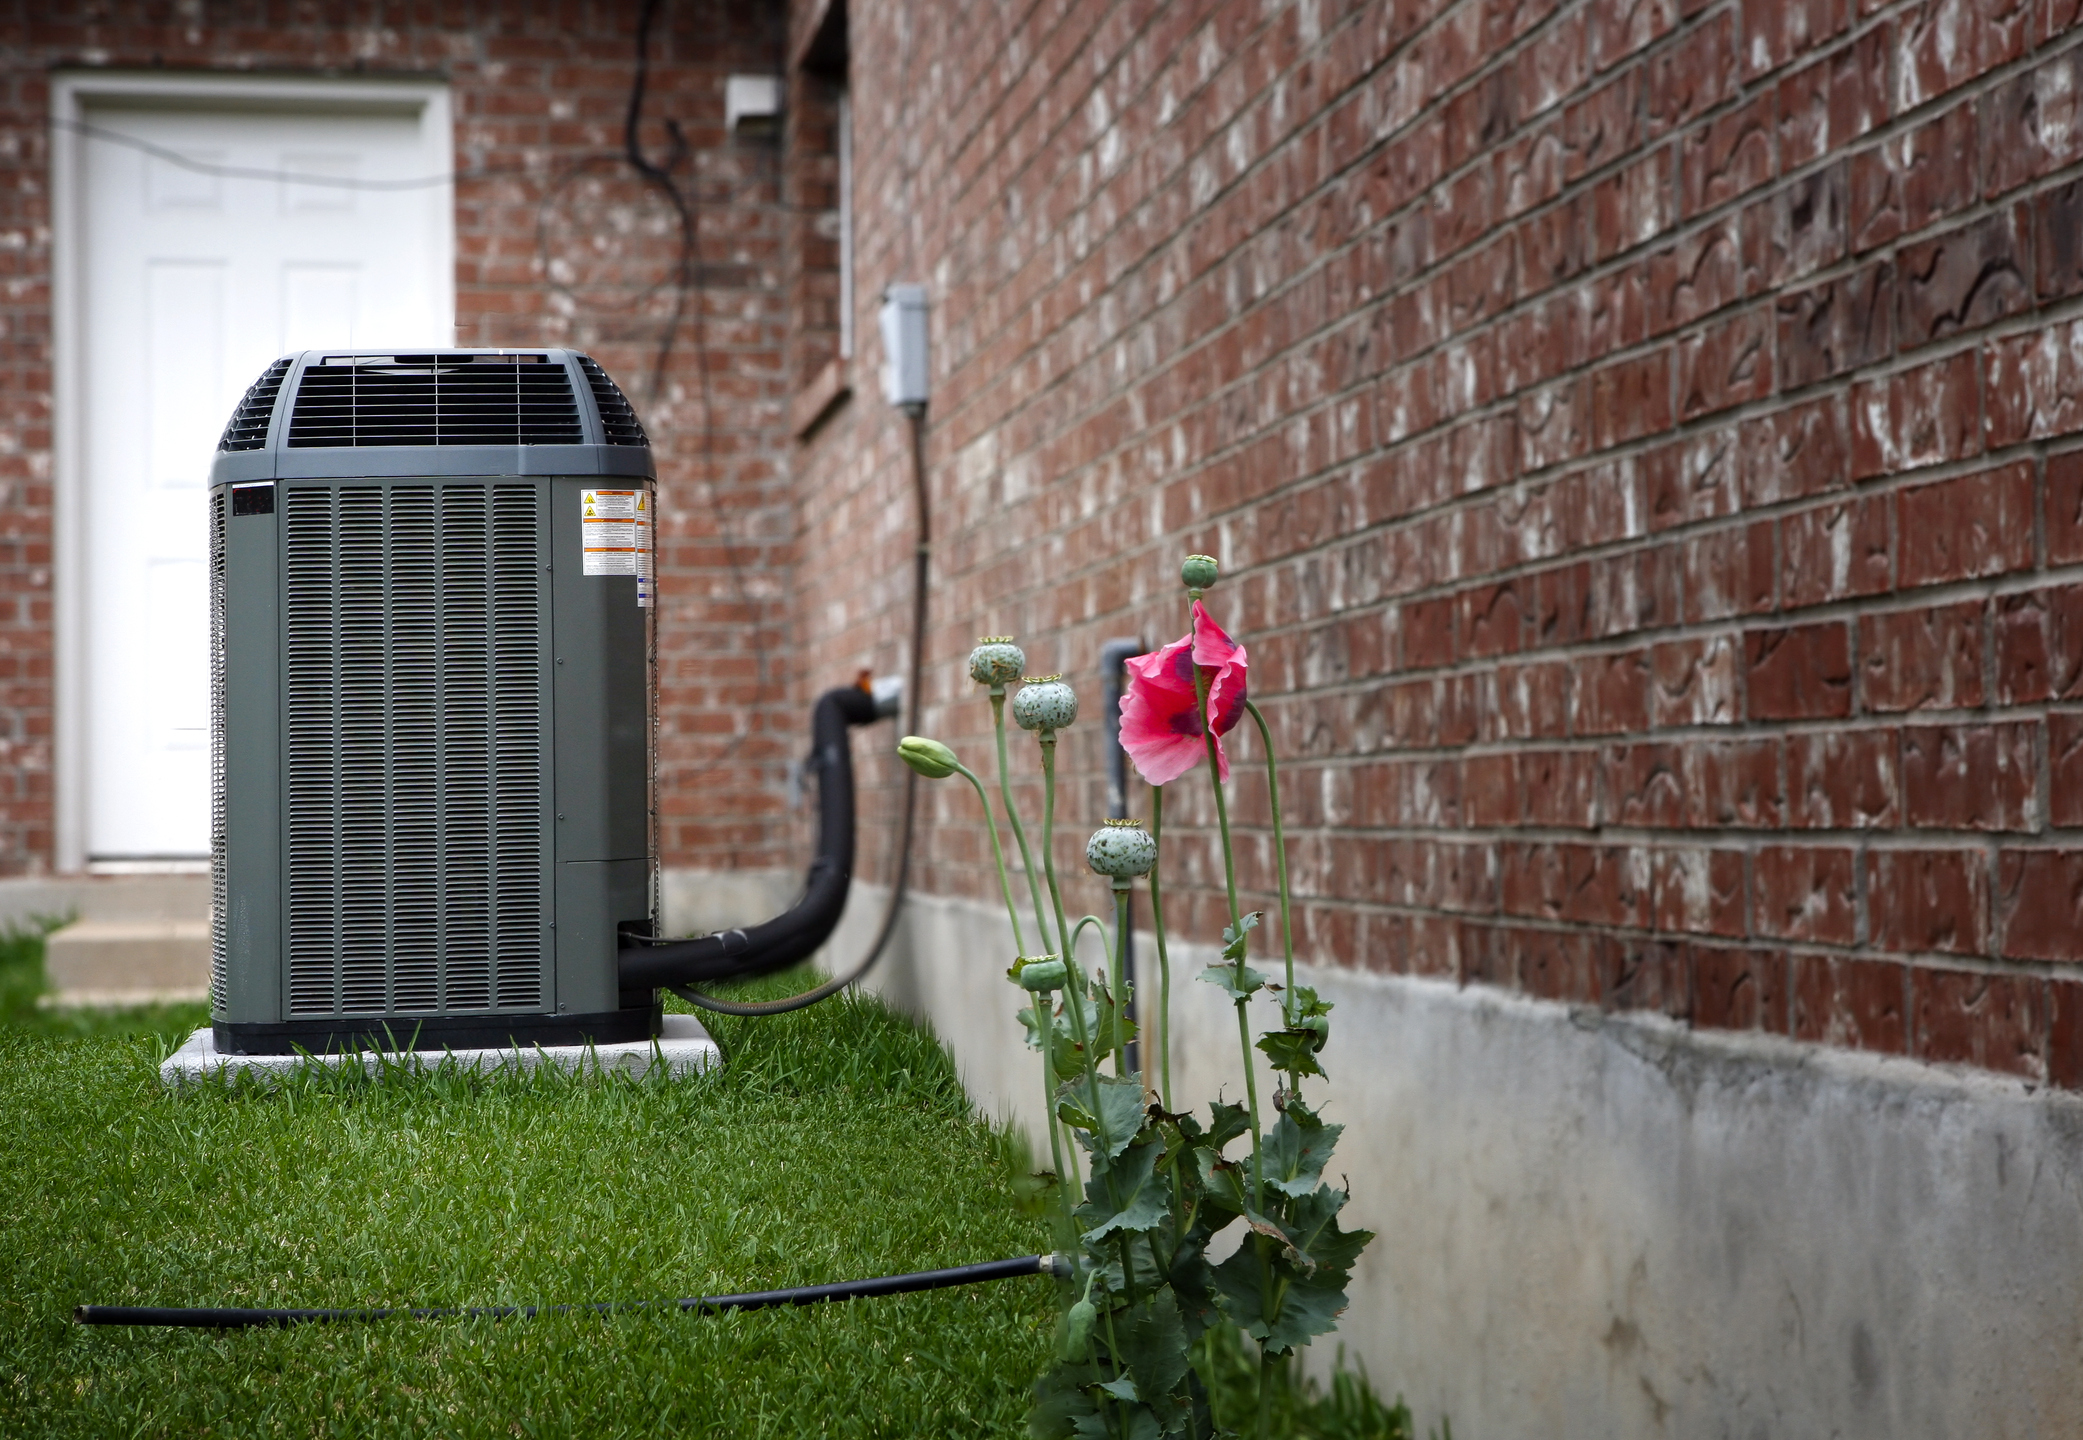 New HVAC unit set up next to a brick home, with pink flowers blooming in foreground.